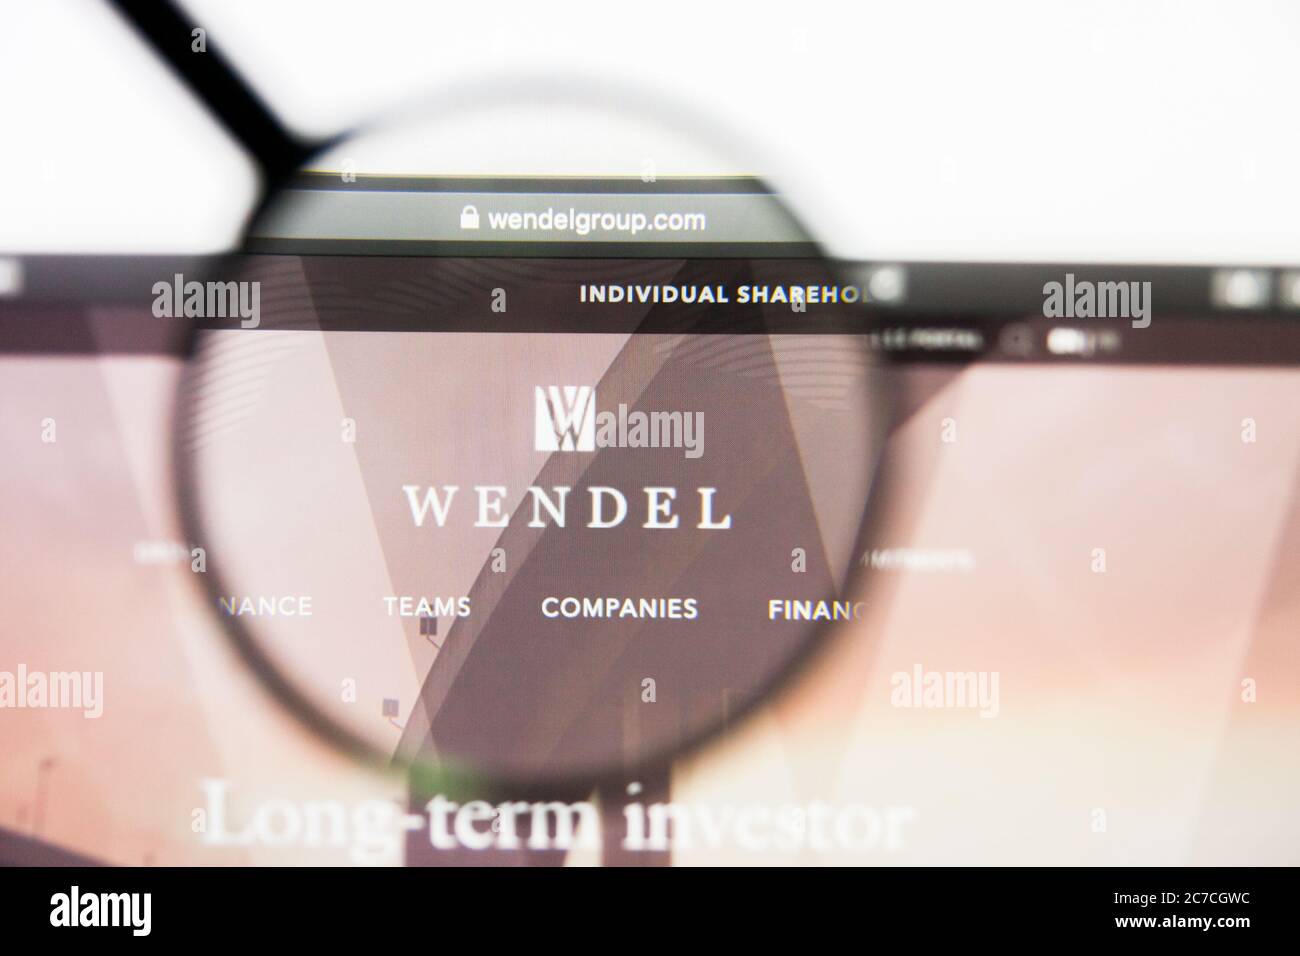 Los Angeles, California, USA - 23 March 2019: Illustrative Editorial of Wendel website homepage. Wendel logo visible on display screen. Stock Photo